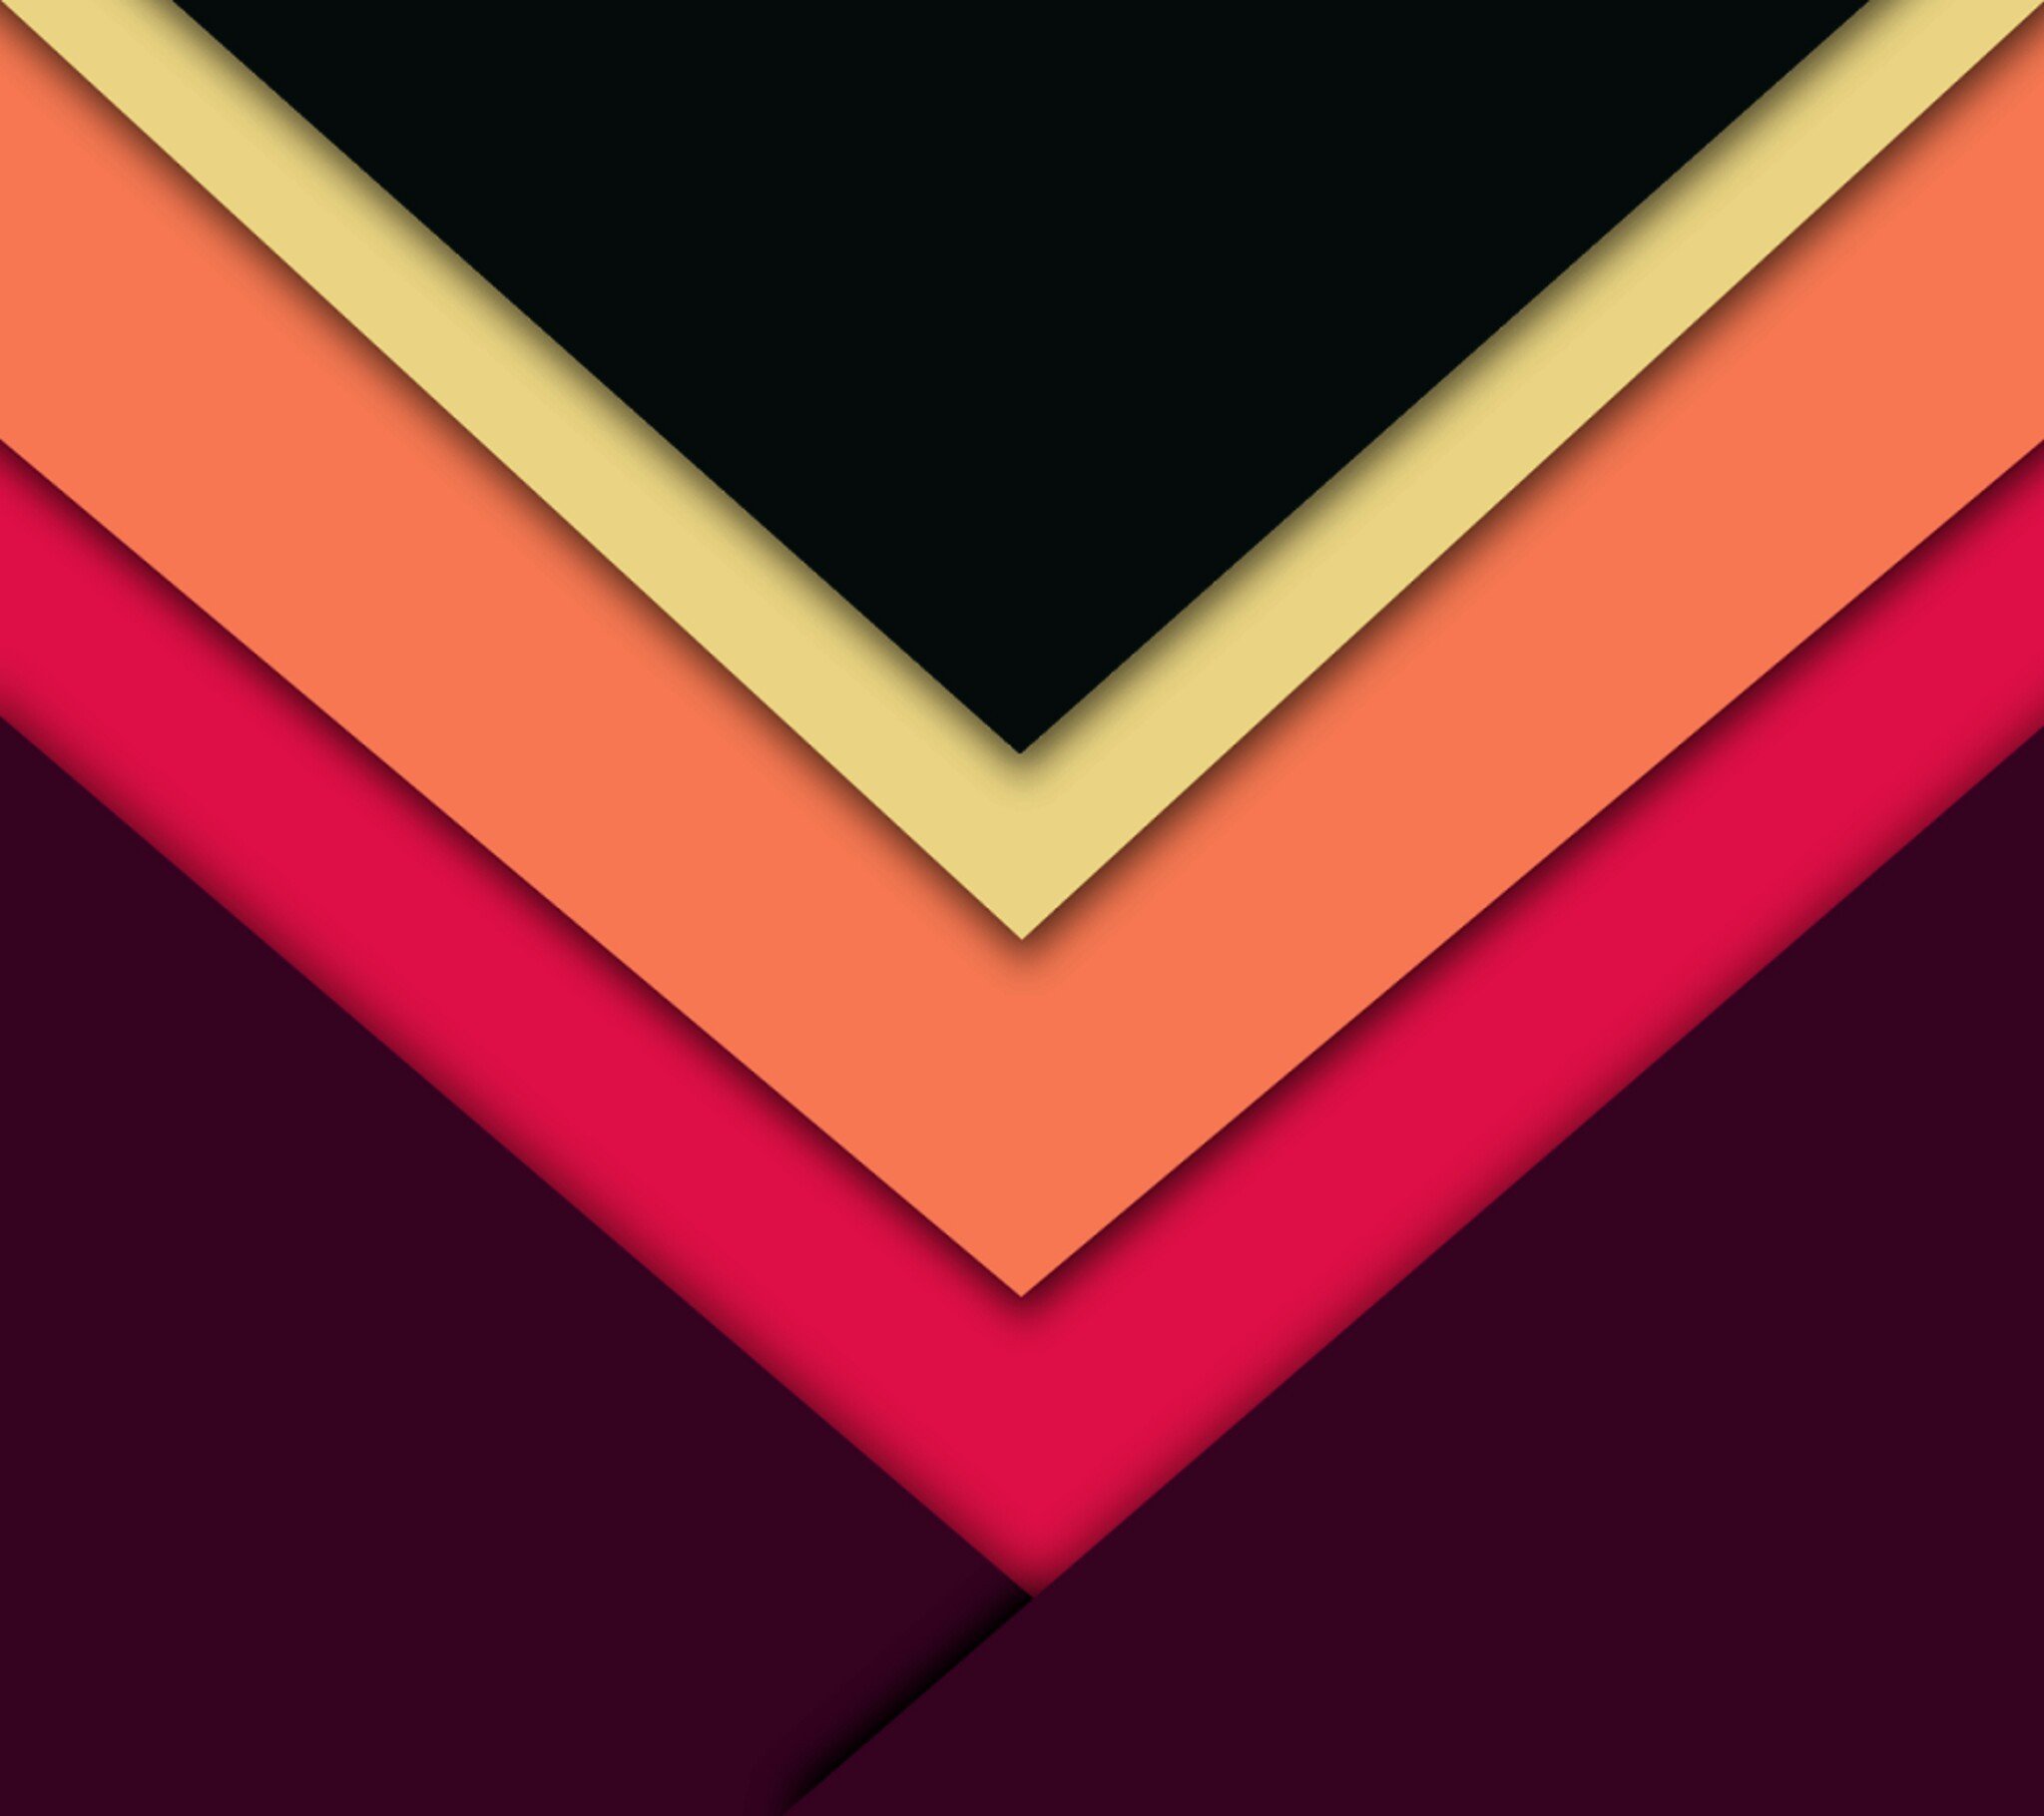 material style, Android L, Minimalism Wallpaper